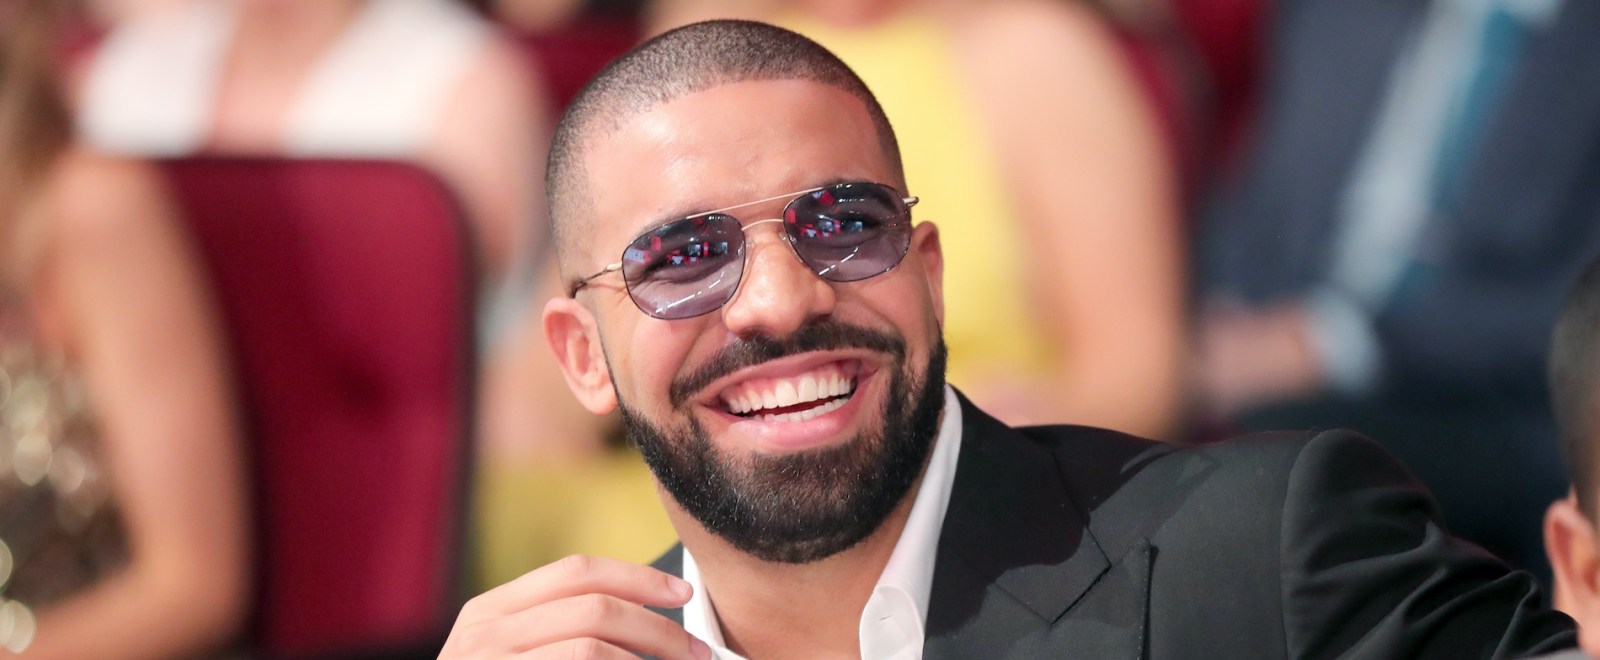 Barack Obama Gives Drake The Green Light To Play Him In A Movie ‘If The Time Comes And He’s Ready’